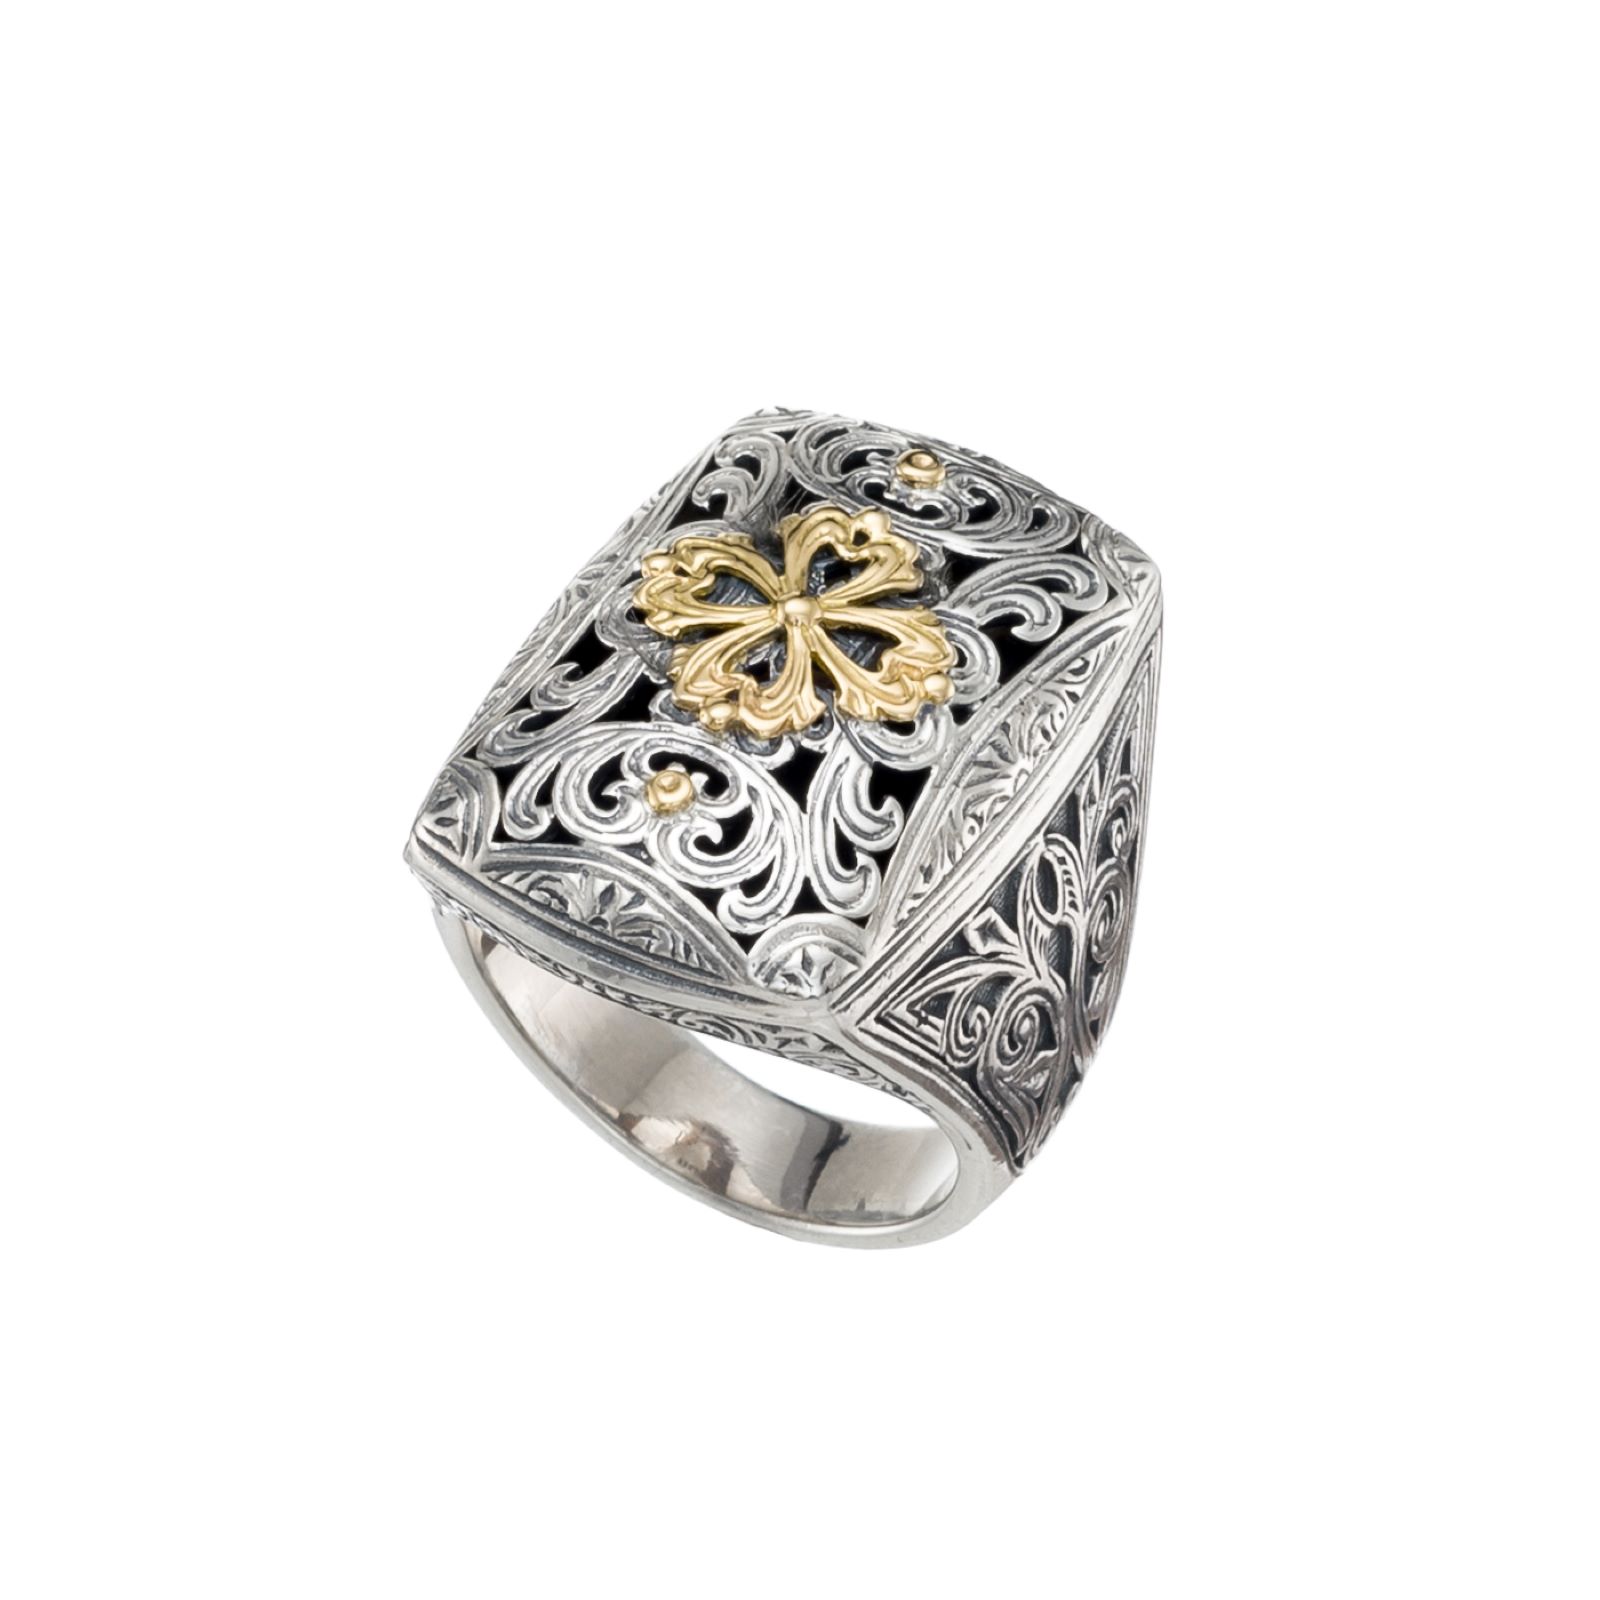 Garden shadows ring in 18K Gold and Sterling Silver